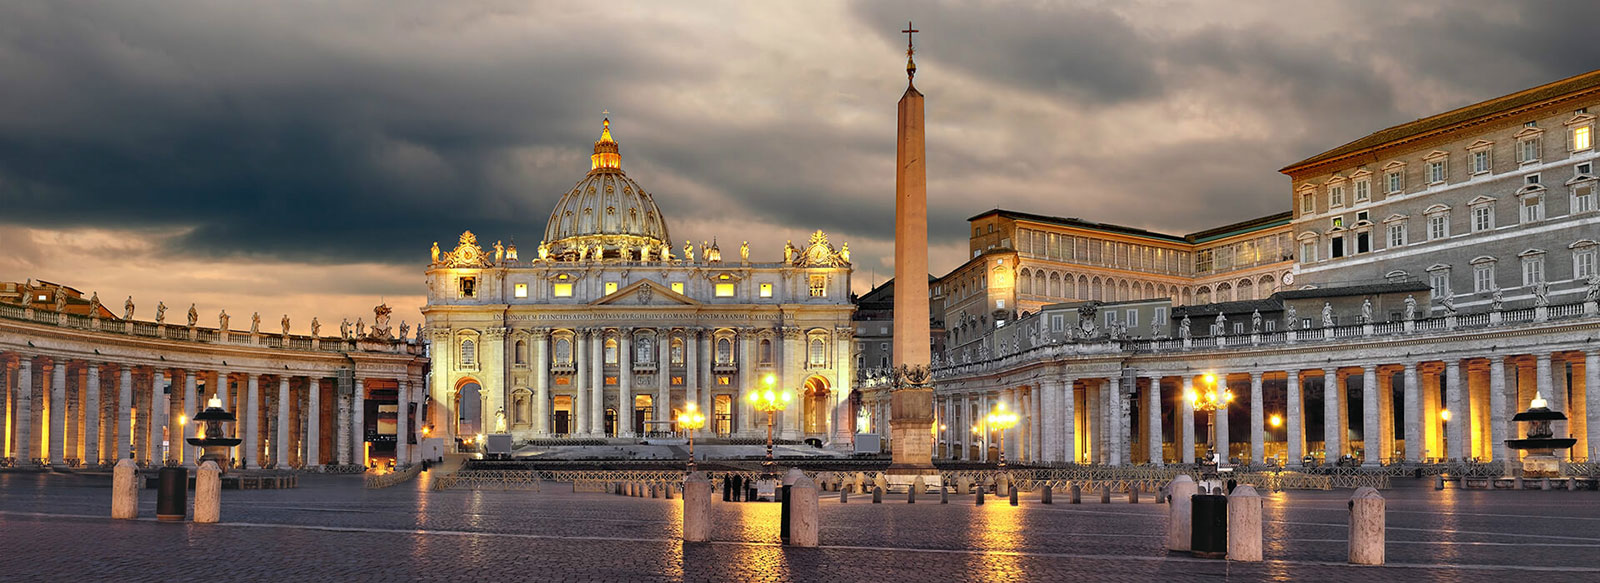 The Papal Basilica of St. Peter in the Vatican